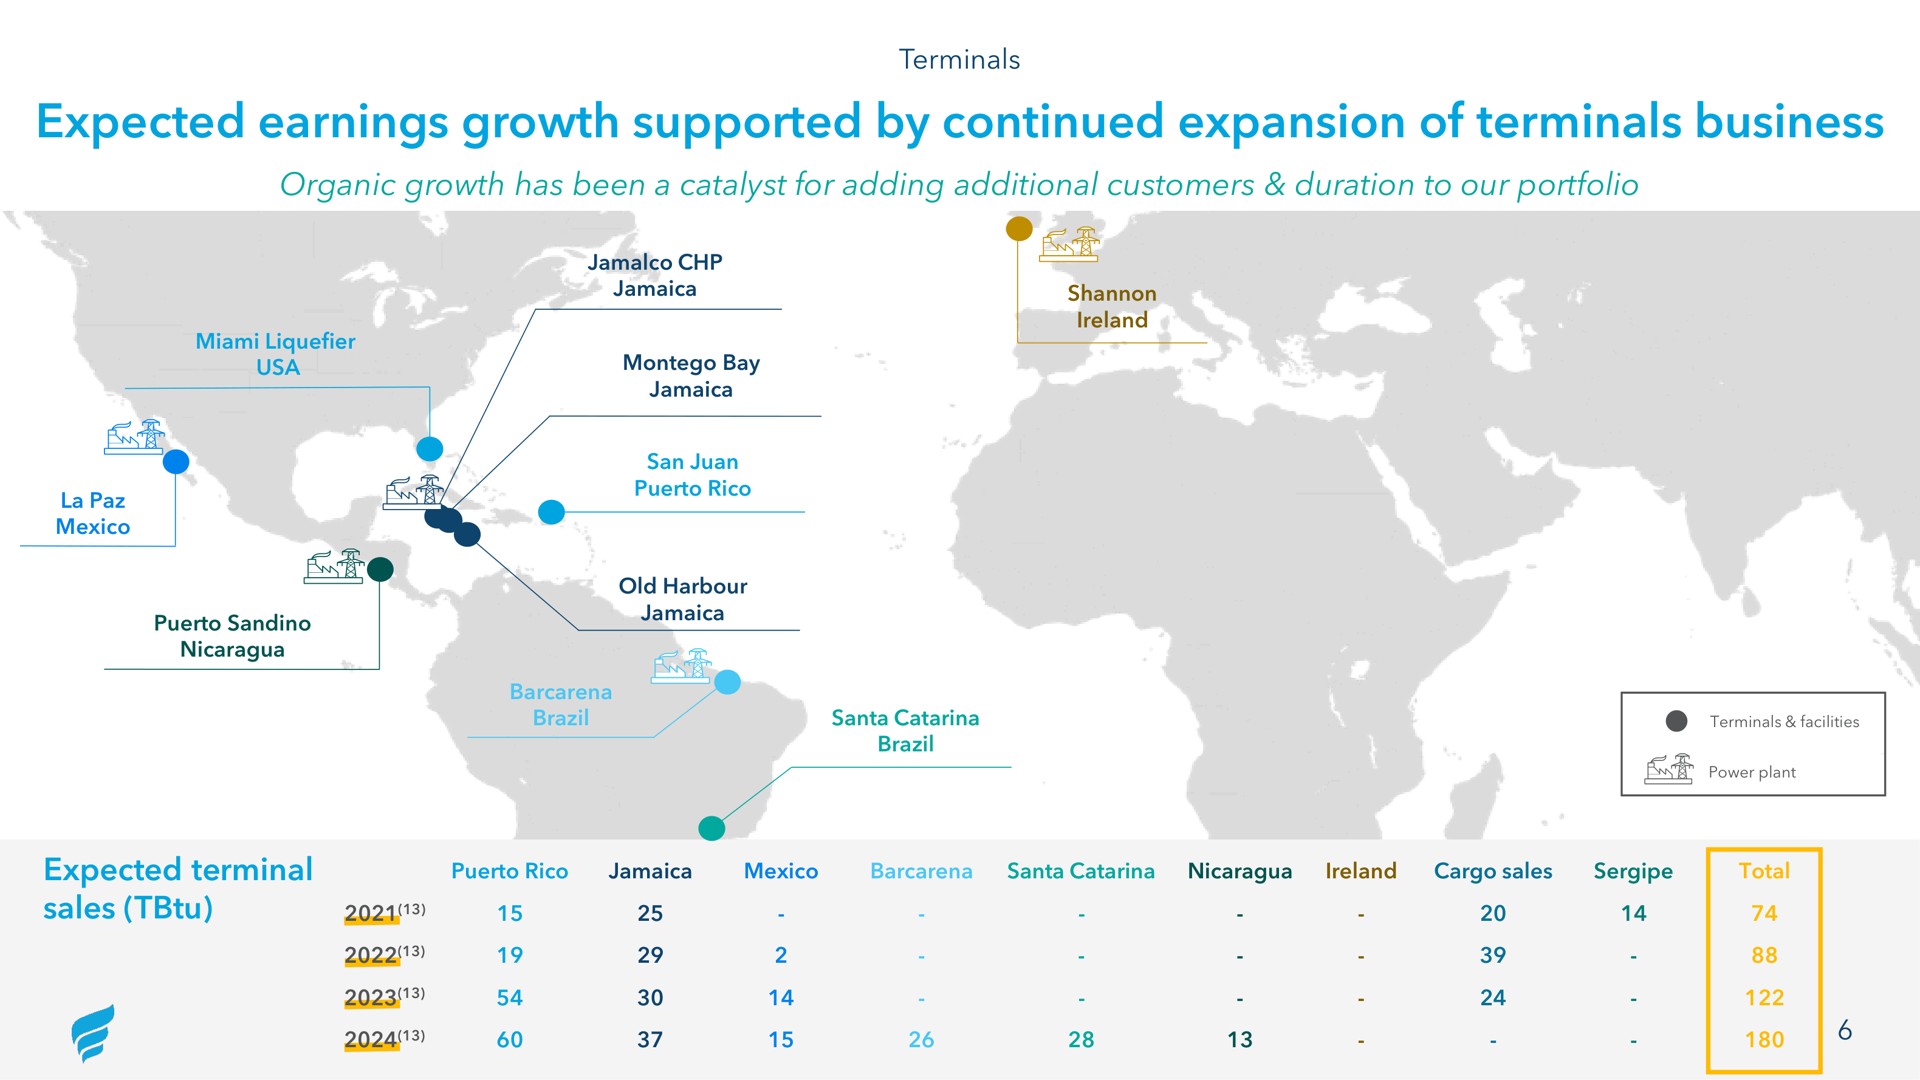 expected earnings growth supported by continued expansion of terminals business | NewFortress Energy